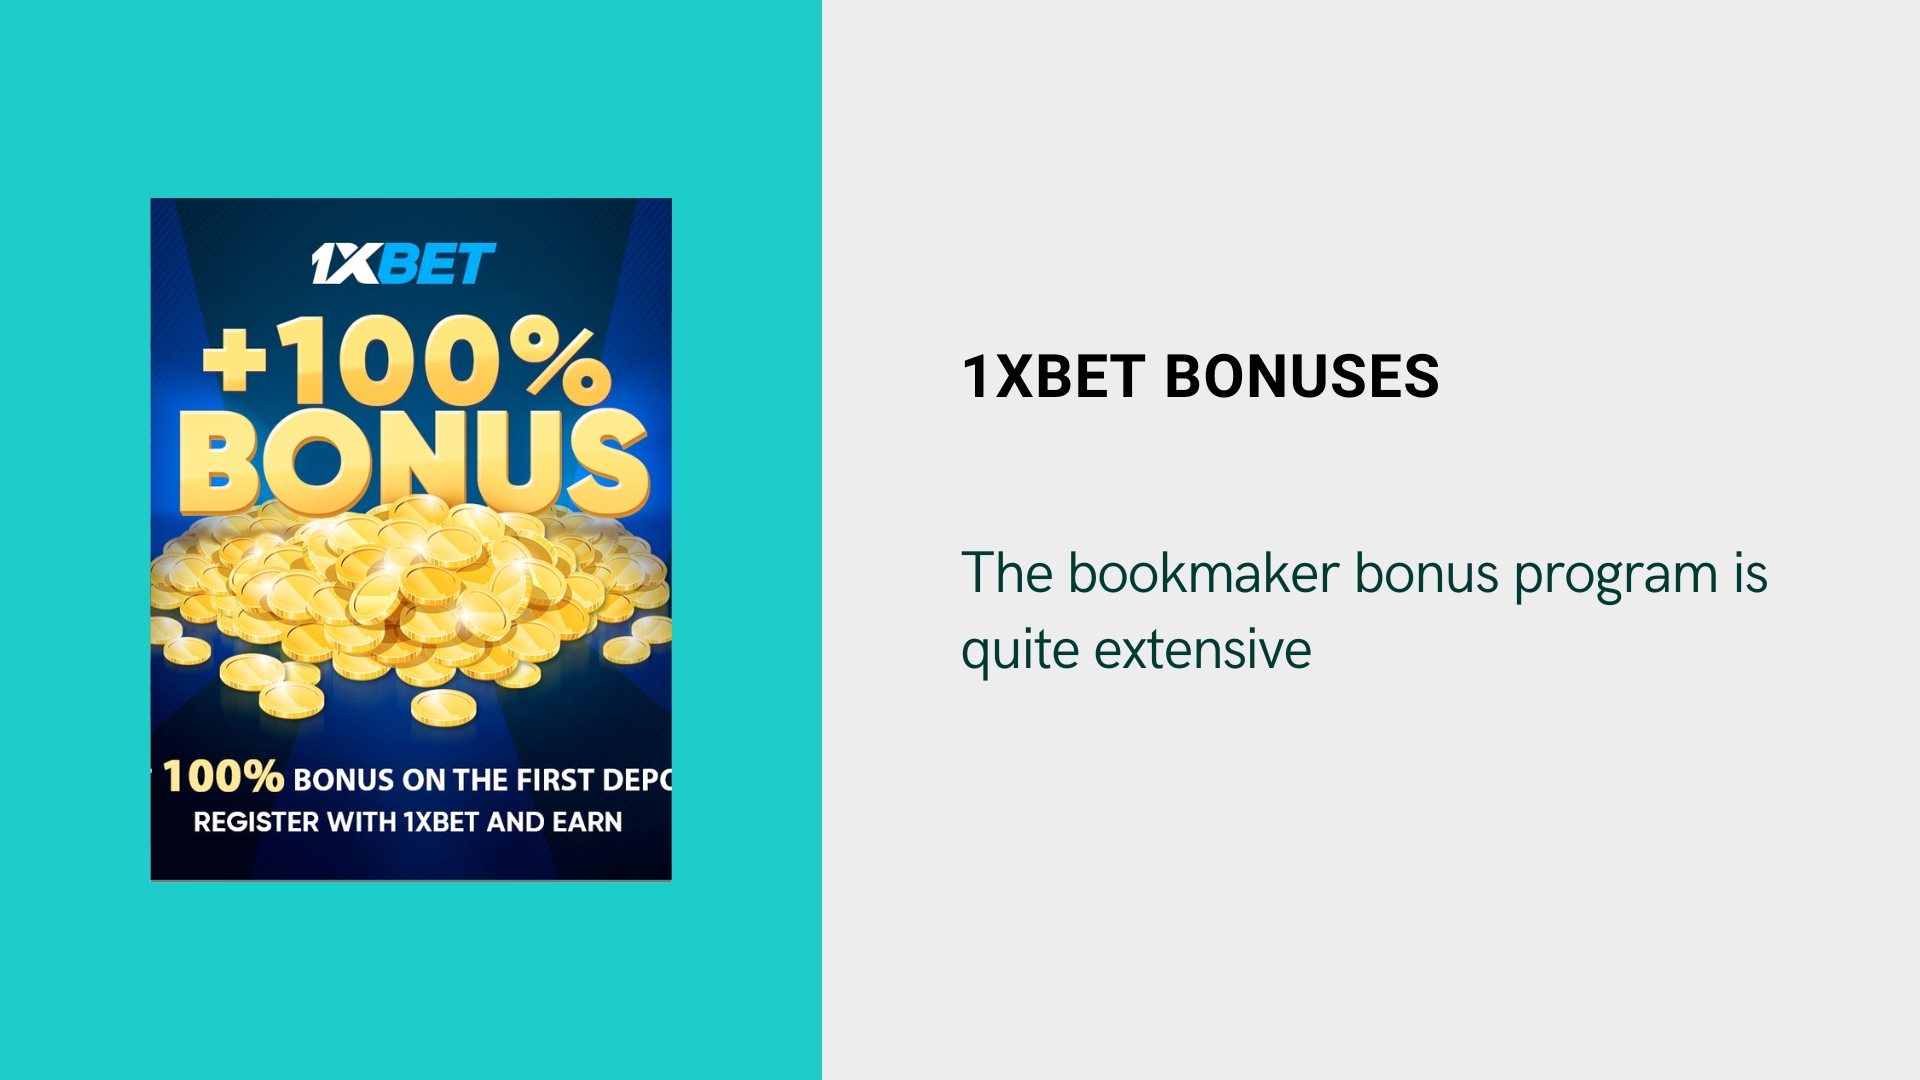 What bonuses does 1xBet offer?